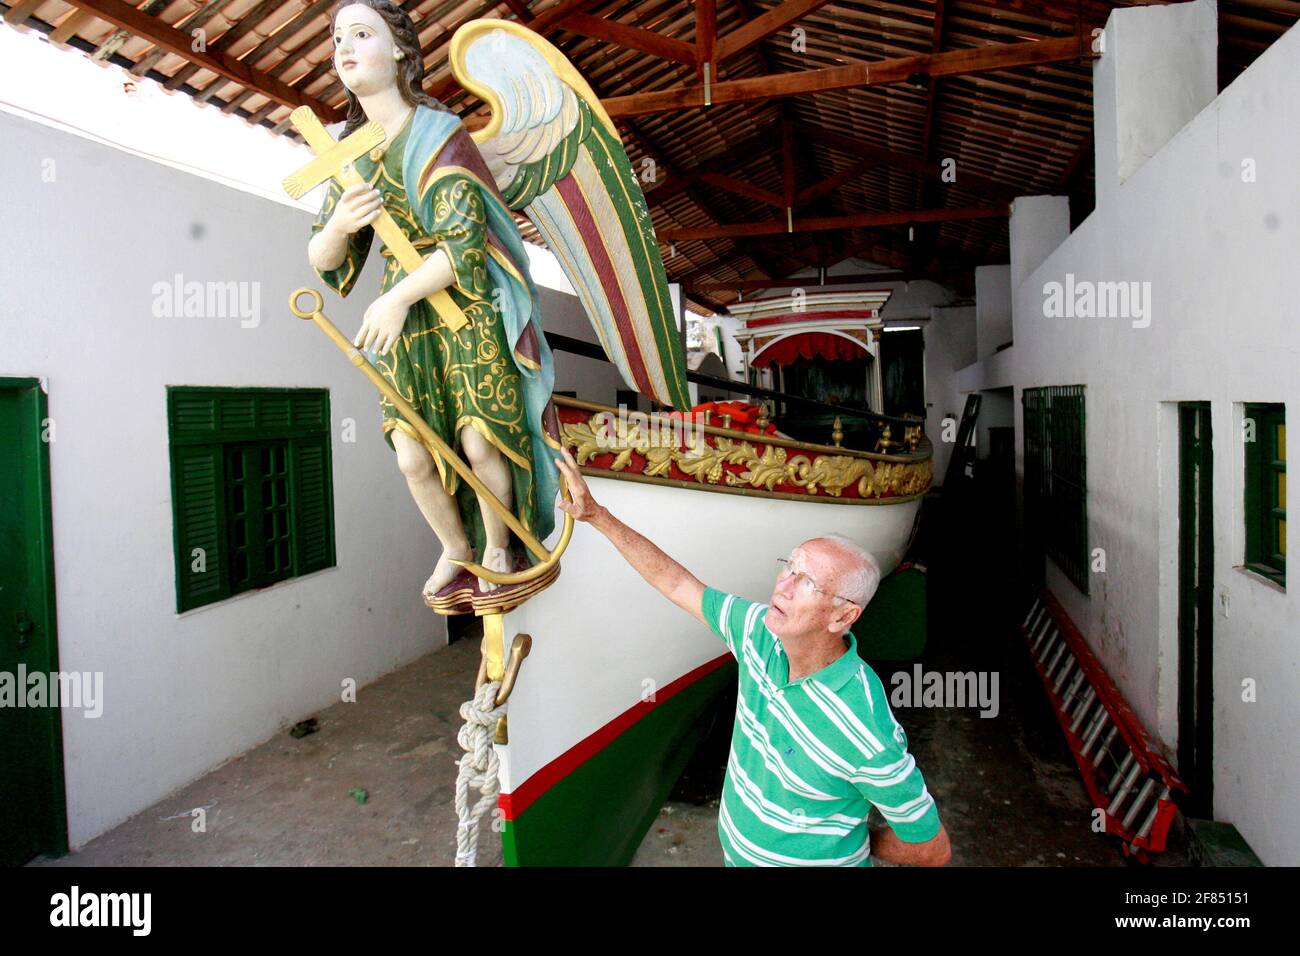 salvador, bahia / brazil - december 30, 2016: Galeota Gratitude of the People, vessel used in maritime procession by the Bay of All Saints since 1892. Stock Photo